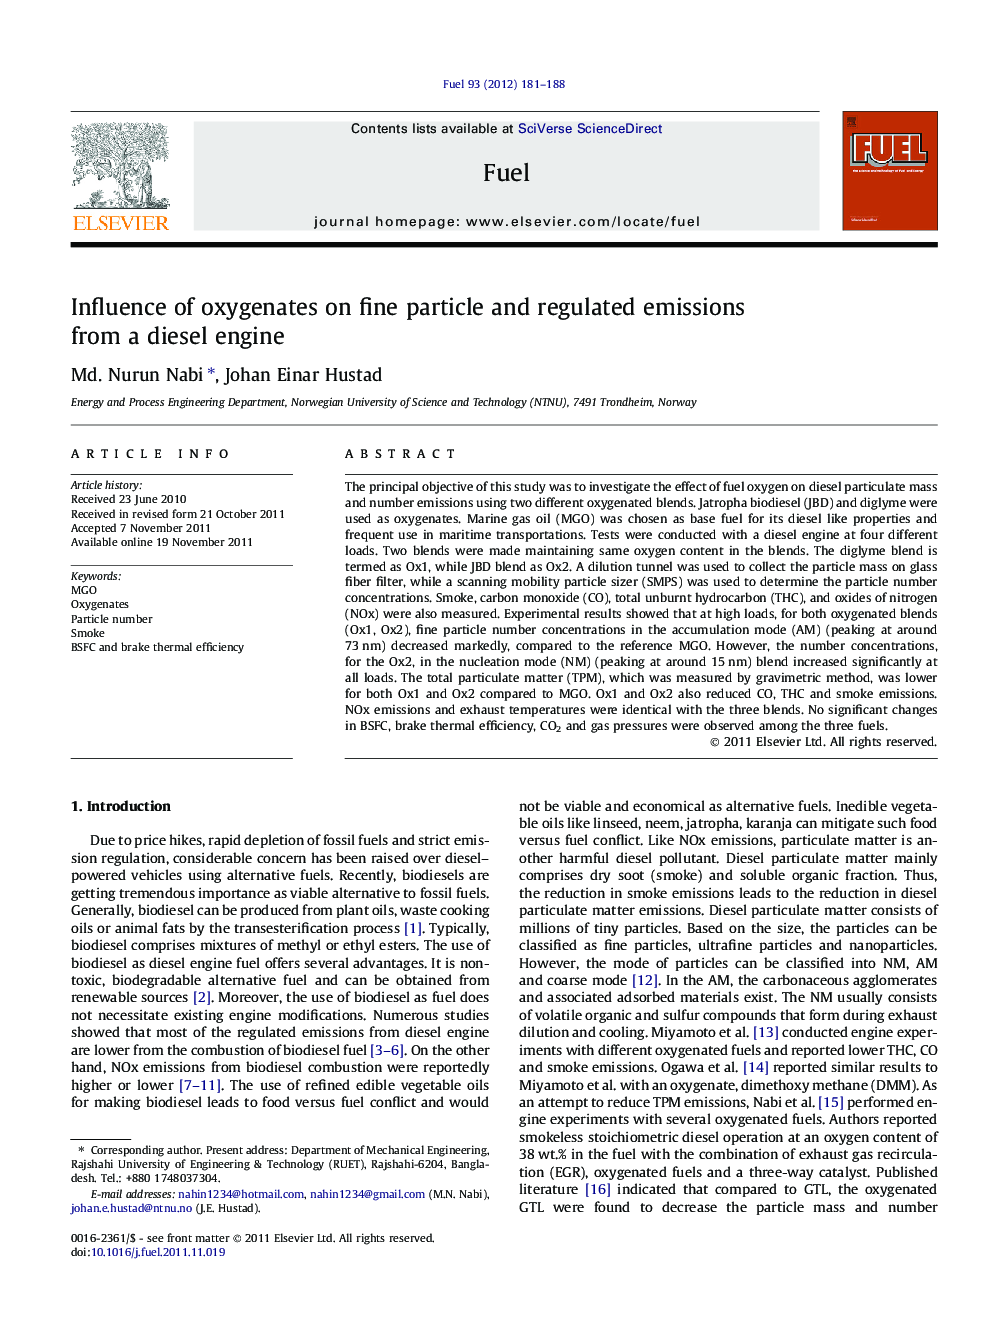 Influence of oxygenates on fine particle and regulated emissions from a diesel engine